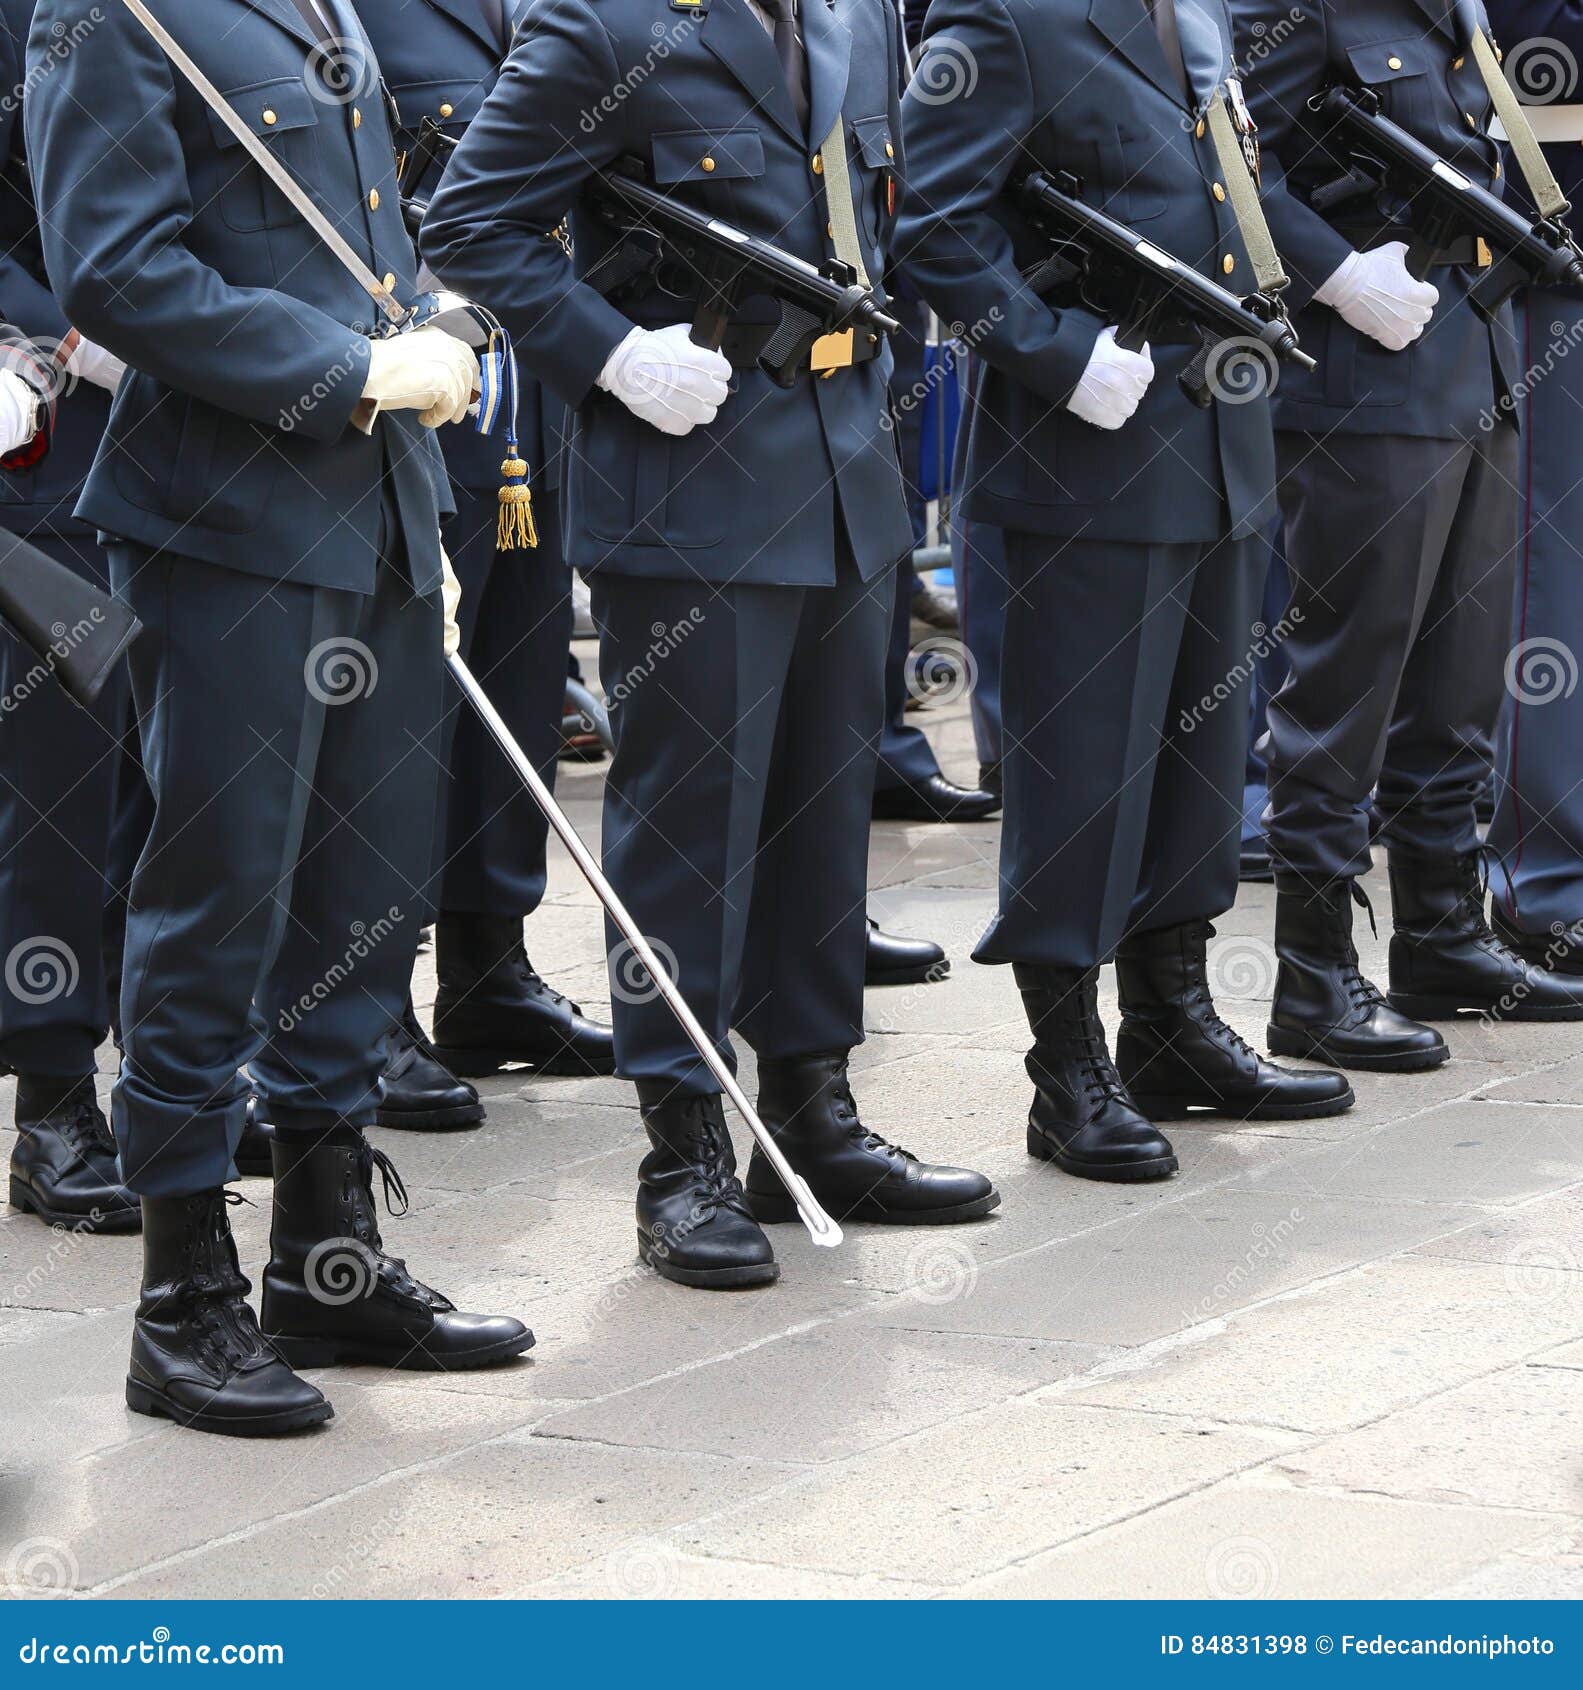 italian financial police officers called guardia di finanza with